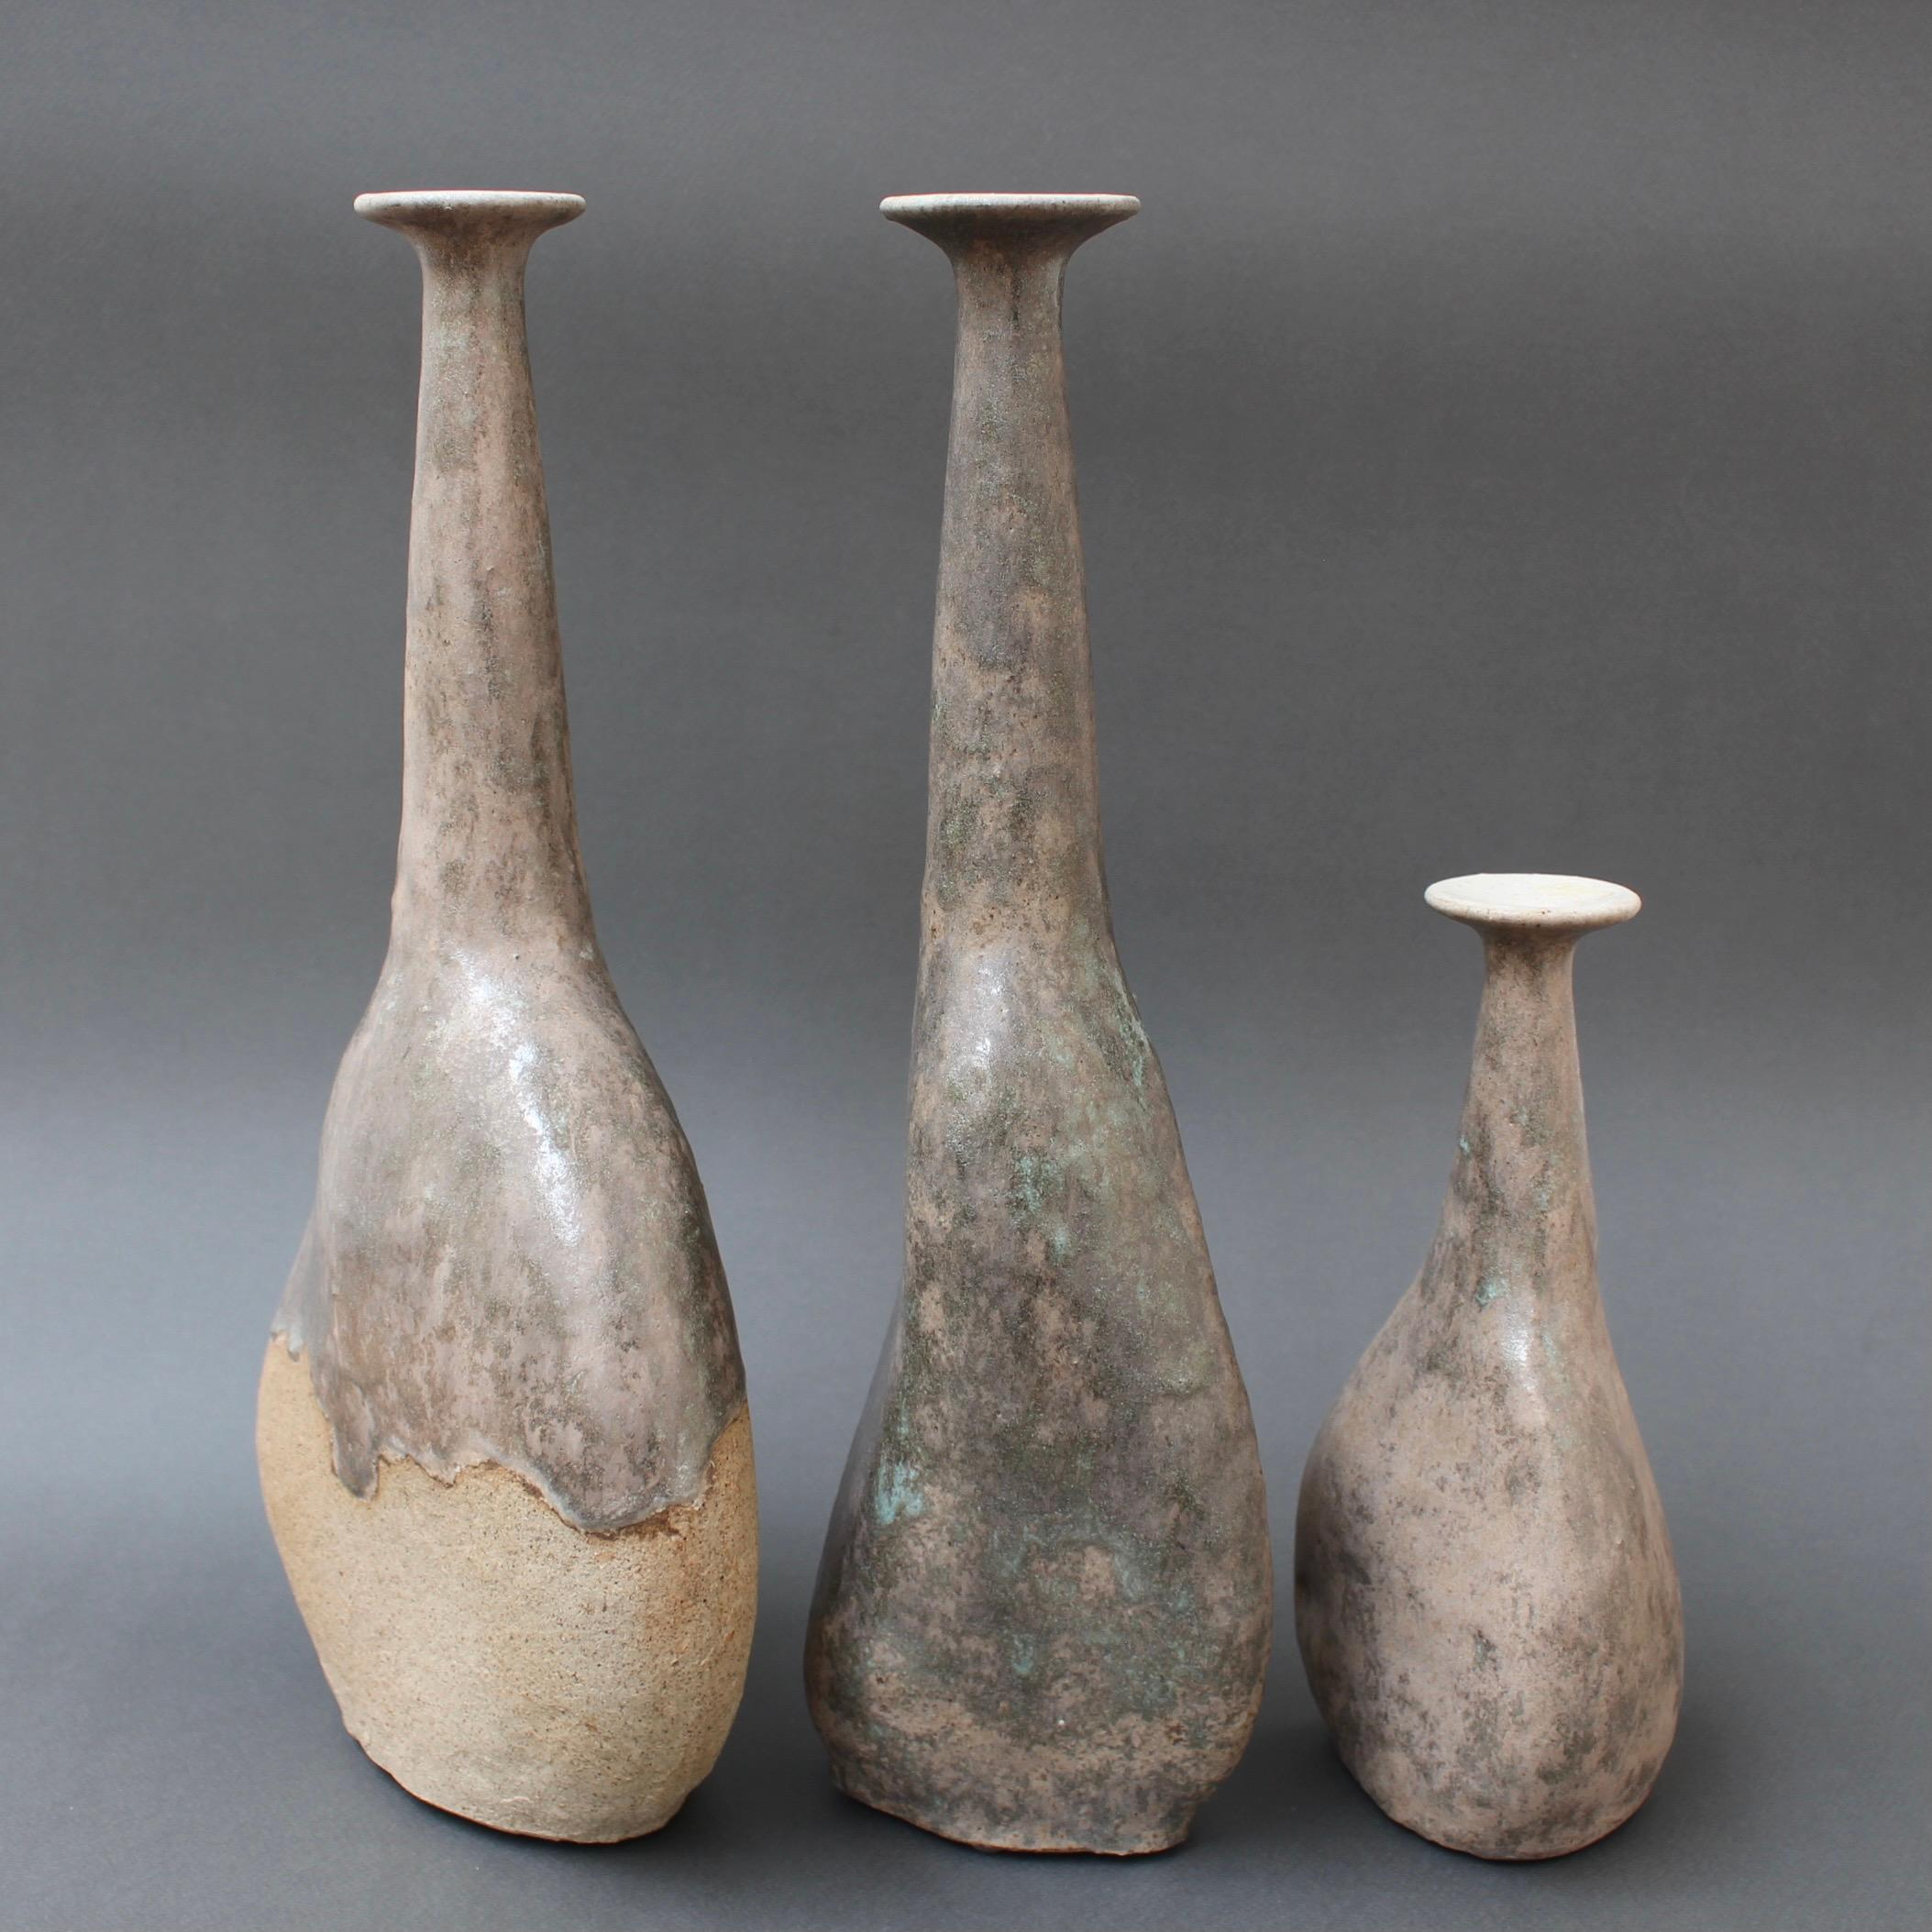 Set of three stoneware vases by Italian ceramicist Bruno Gambone, (circa 1980s). These three unique graceful, narrow-opening flower vases are works of art seemingly formed or sculpted from larger stones by ancient peoples. Both visually stunning and